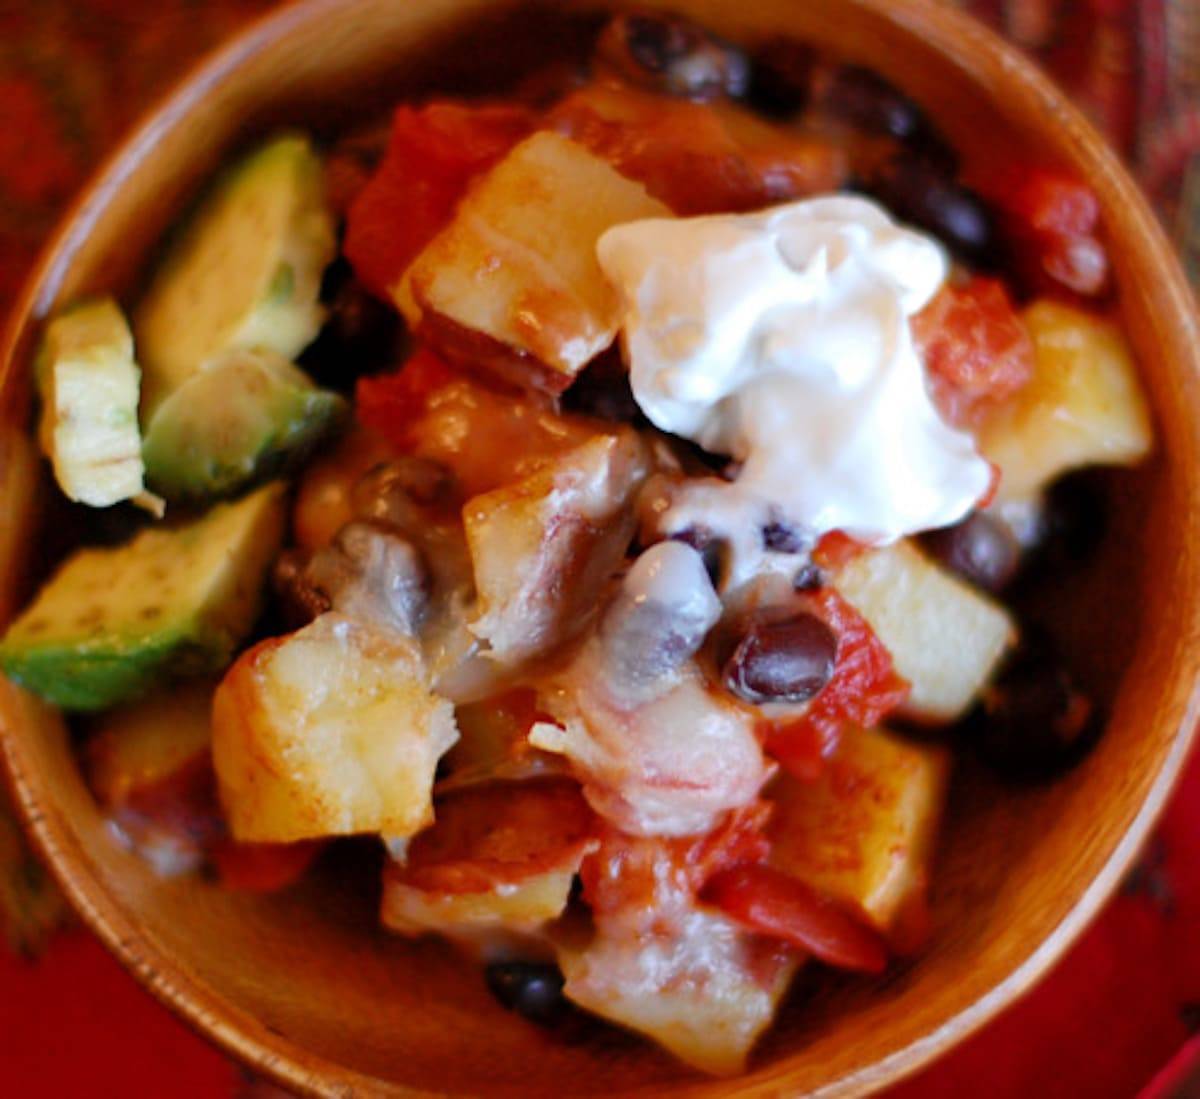 Cheesy roasted potato nachos in a wooden bowl with sour cream topping.